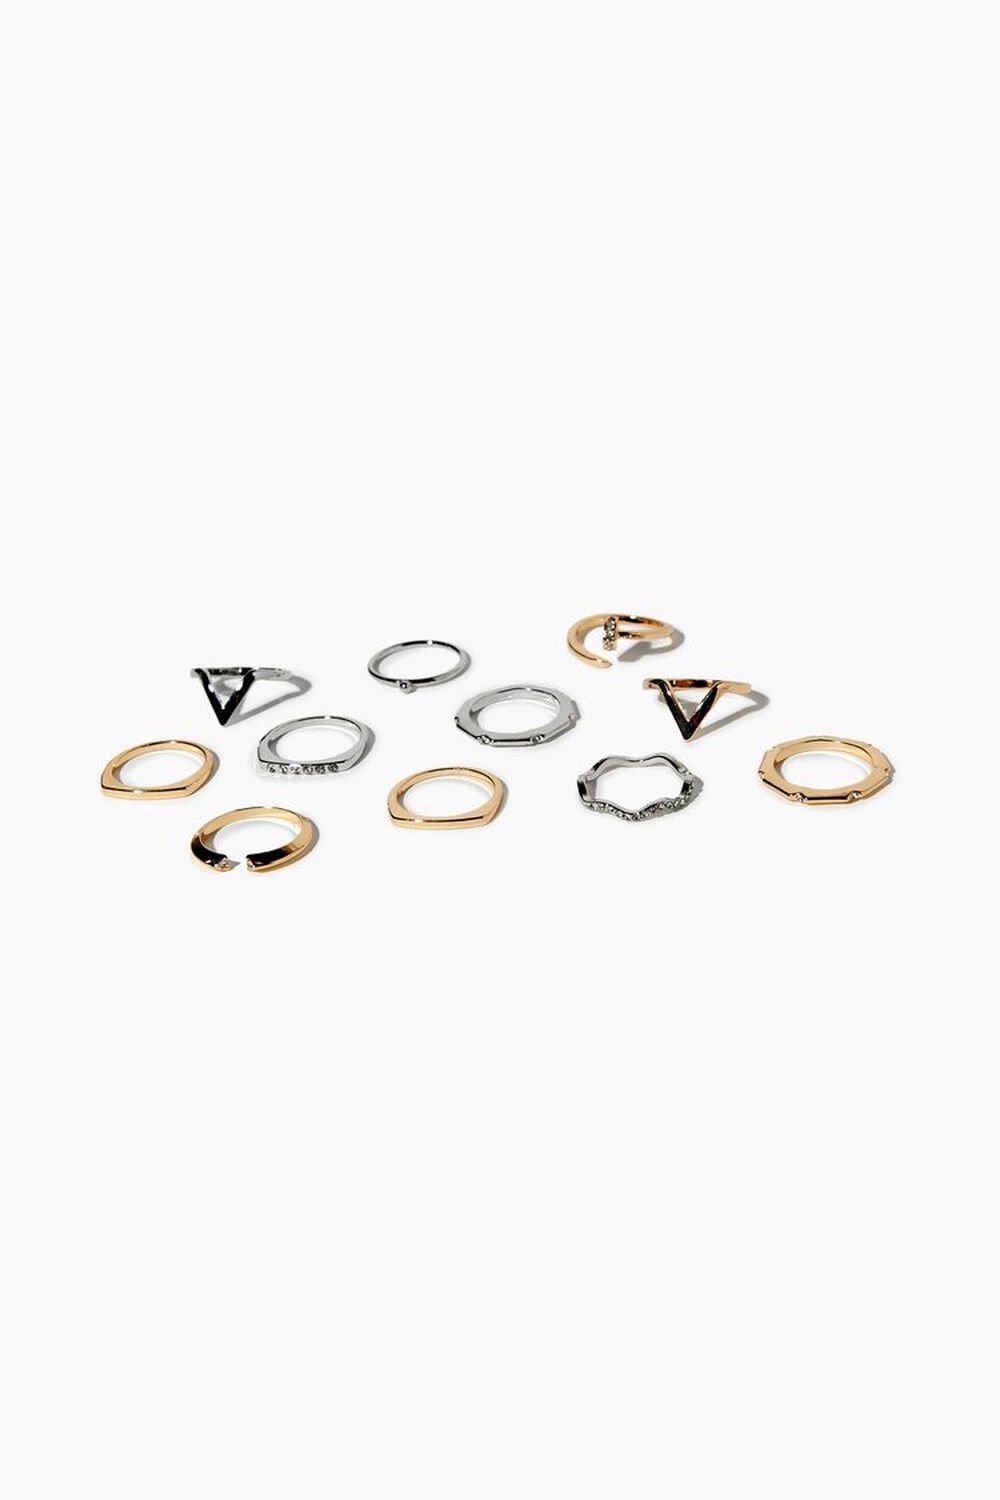 GOLD/SILVER Assorted Ring Set, image 1